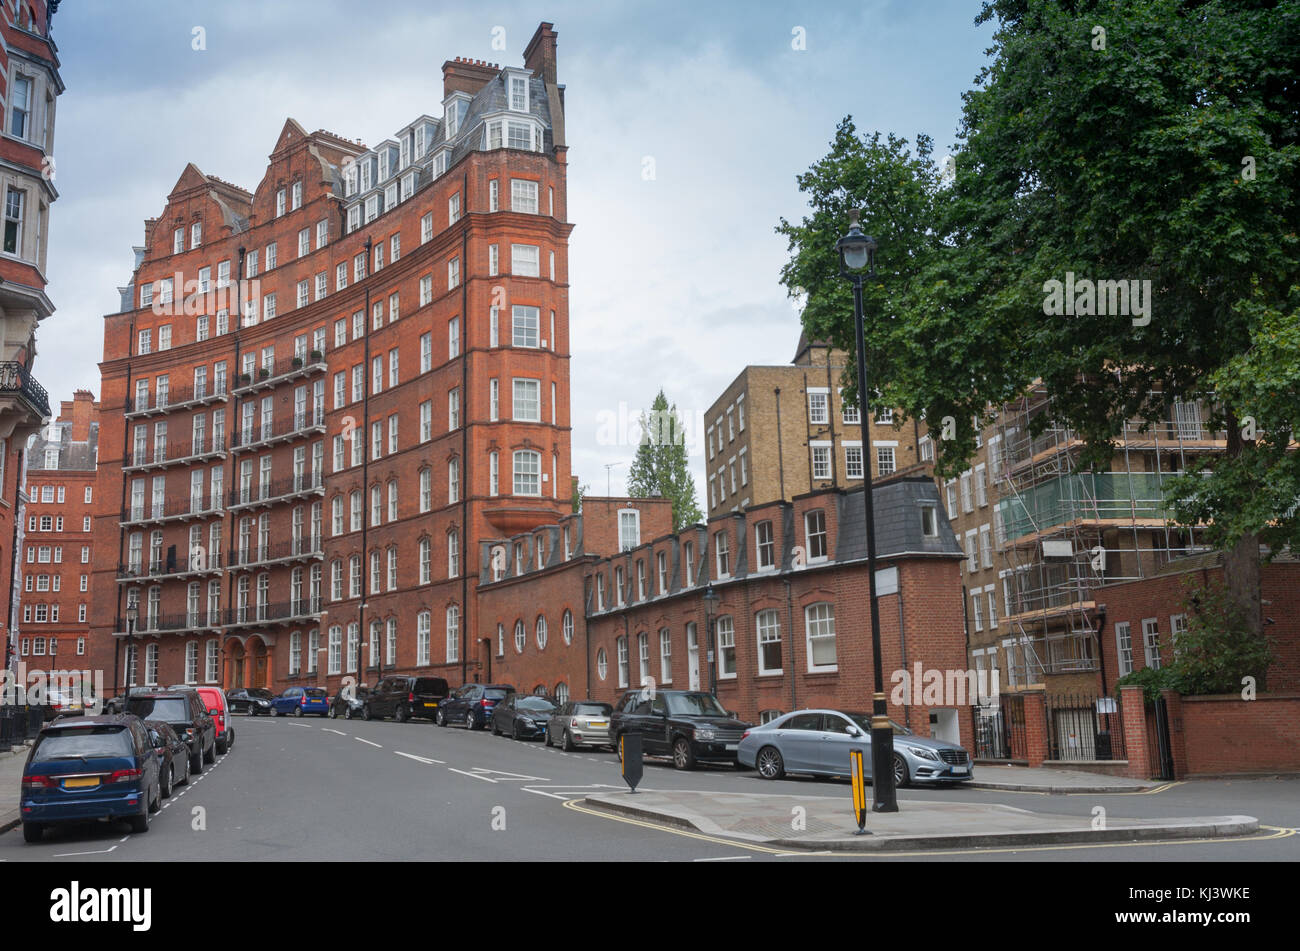 Curved building with red brick facade on Kensington Gore, London, England. Stock Photo